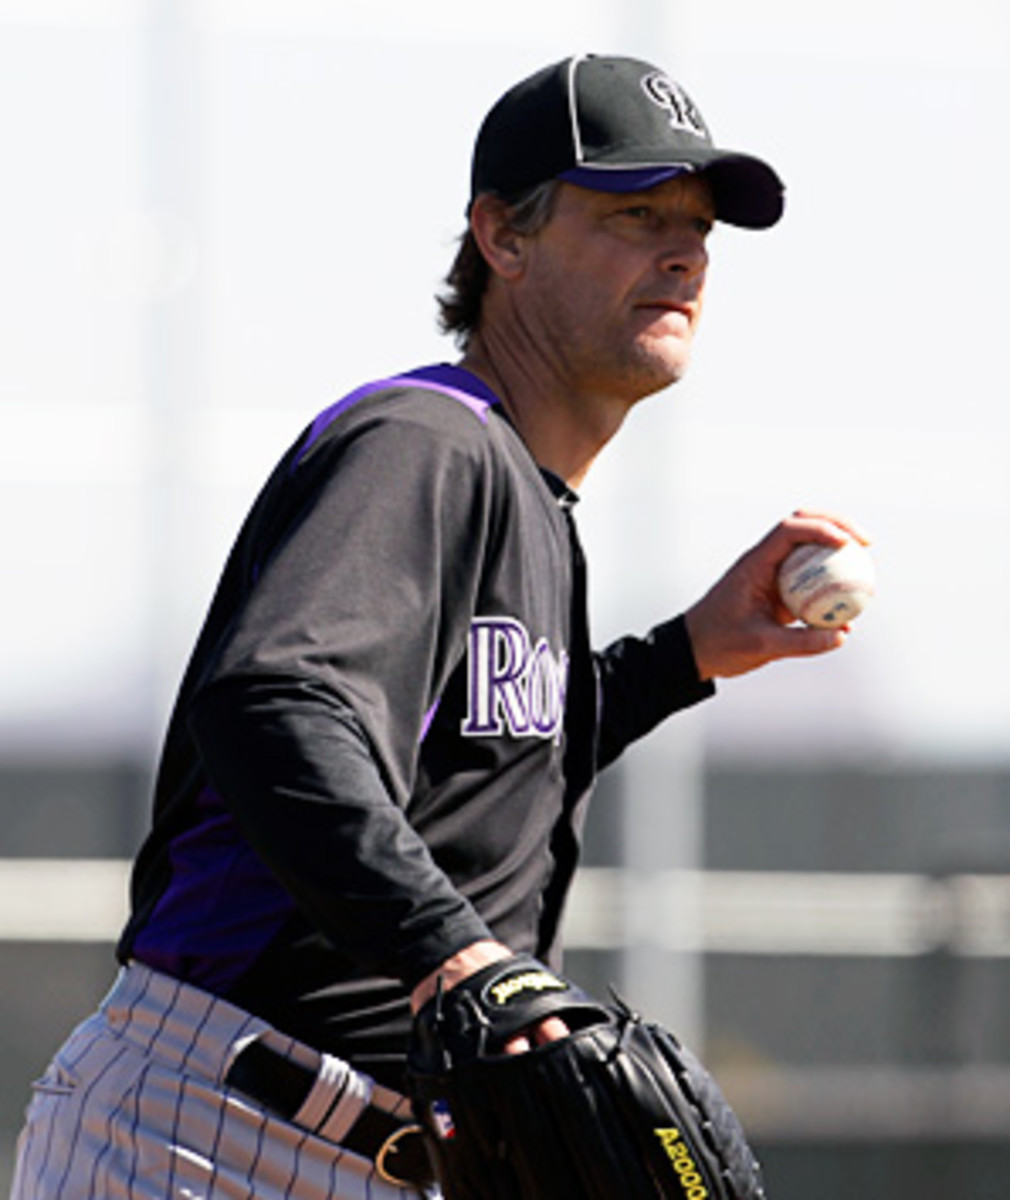 Tom Verducci: Jamie Moyer's comeback at age 49 embodies baseball's ageless  ideals - Sports Illustrated